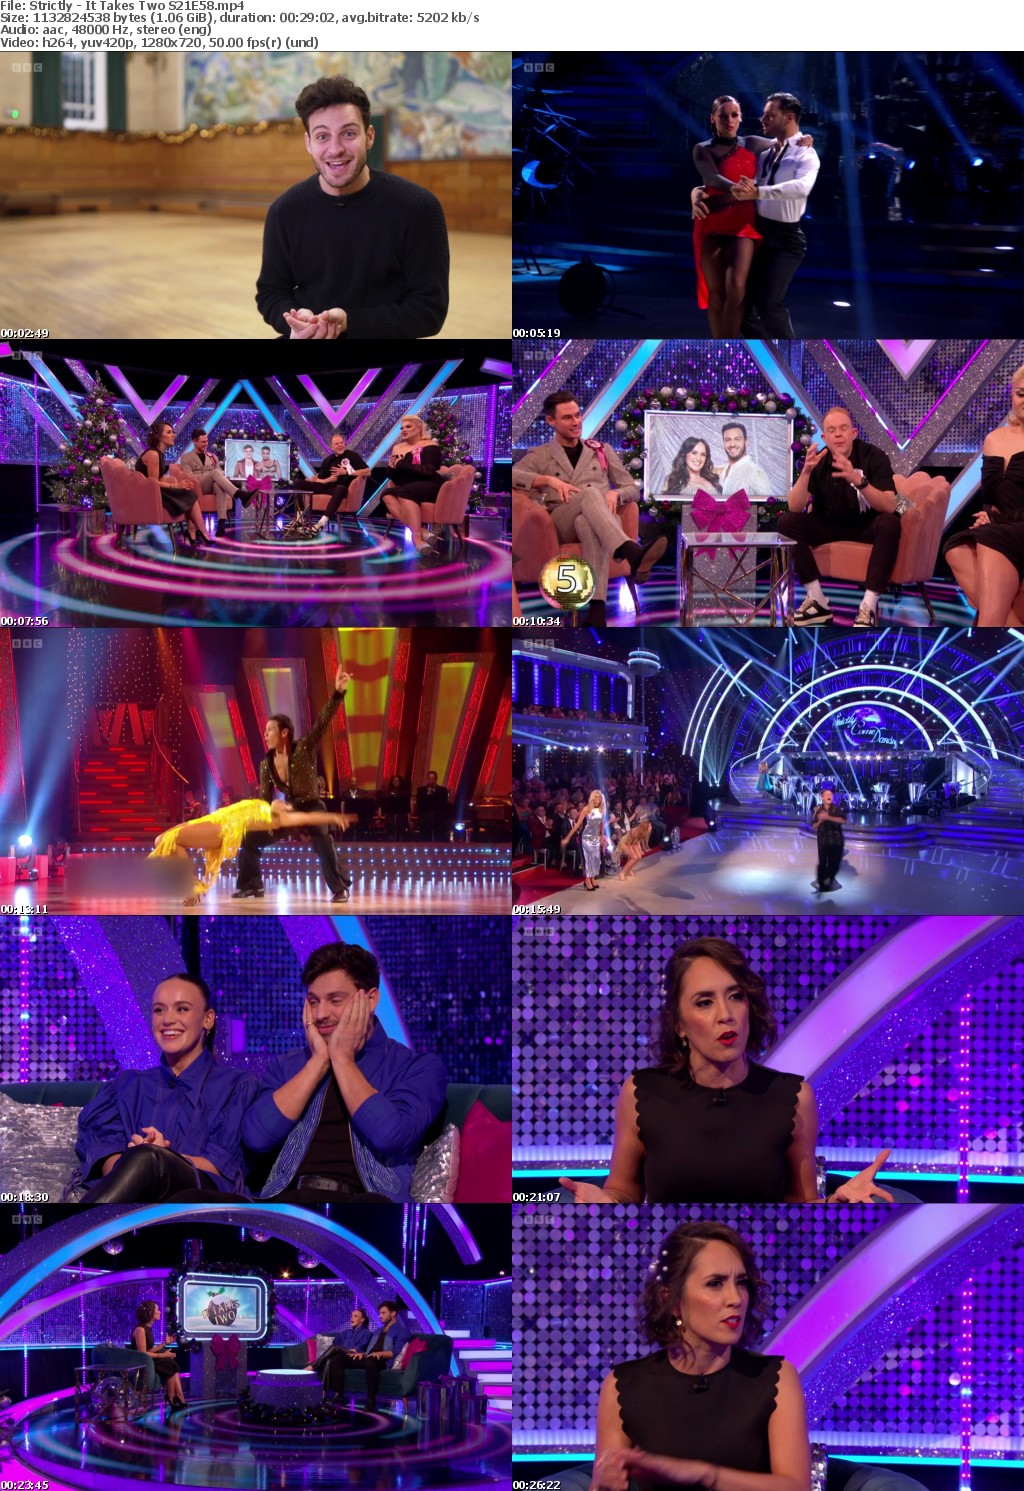 Strictly - It Takes Two S21E58 (1280x720p HD, 50fps, soft Eng subs)